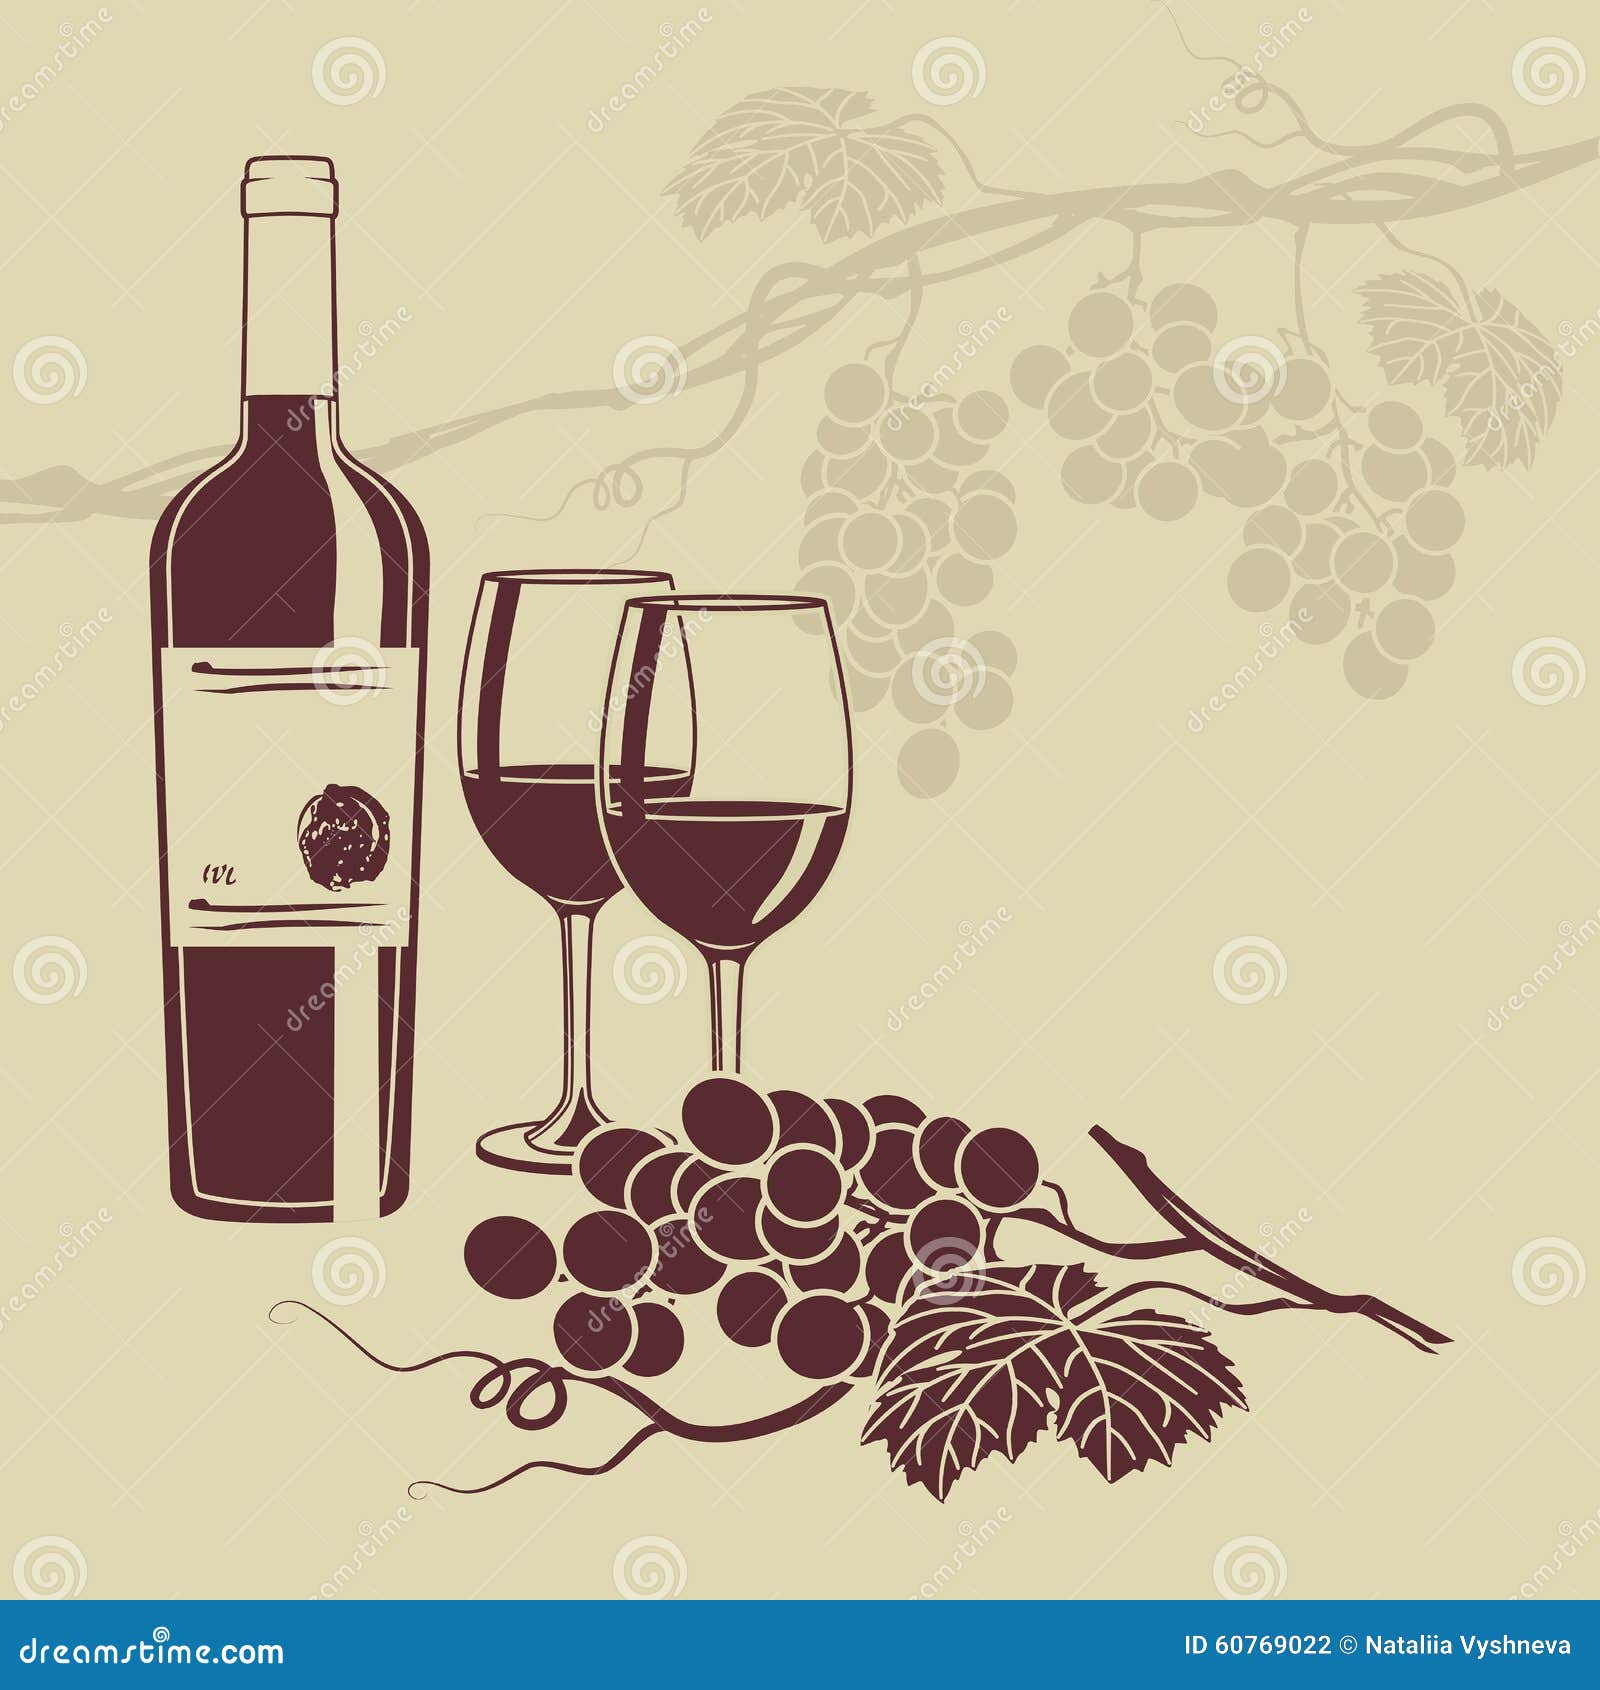 Background Template For The Wine Menu Stock Vector - Image: 60769022